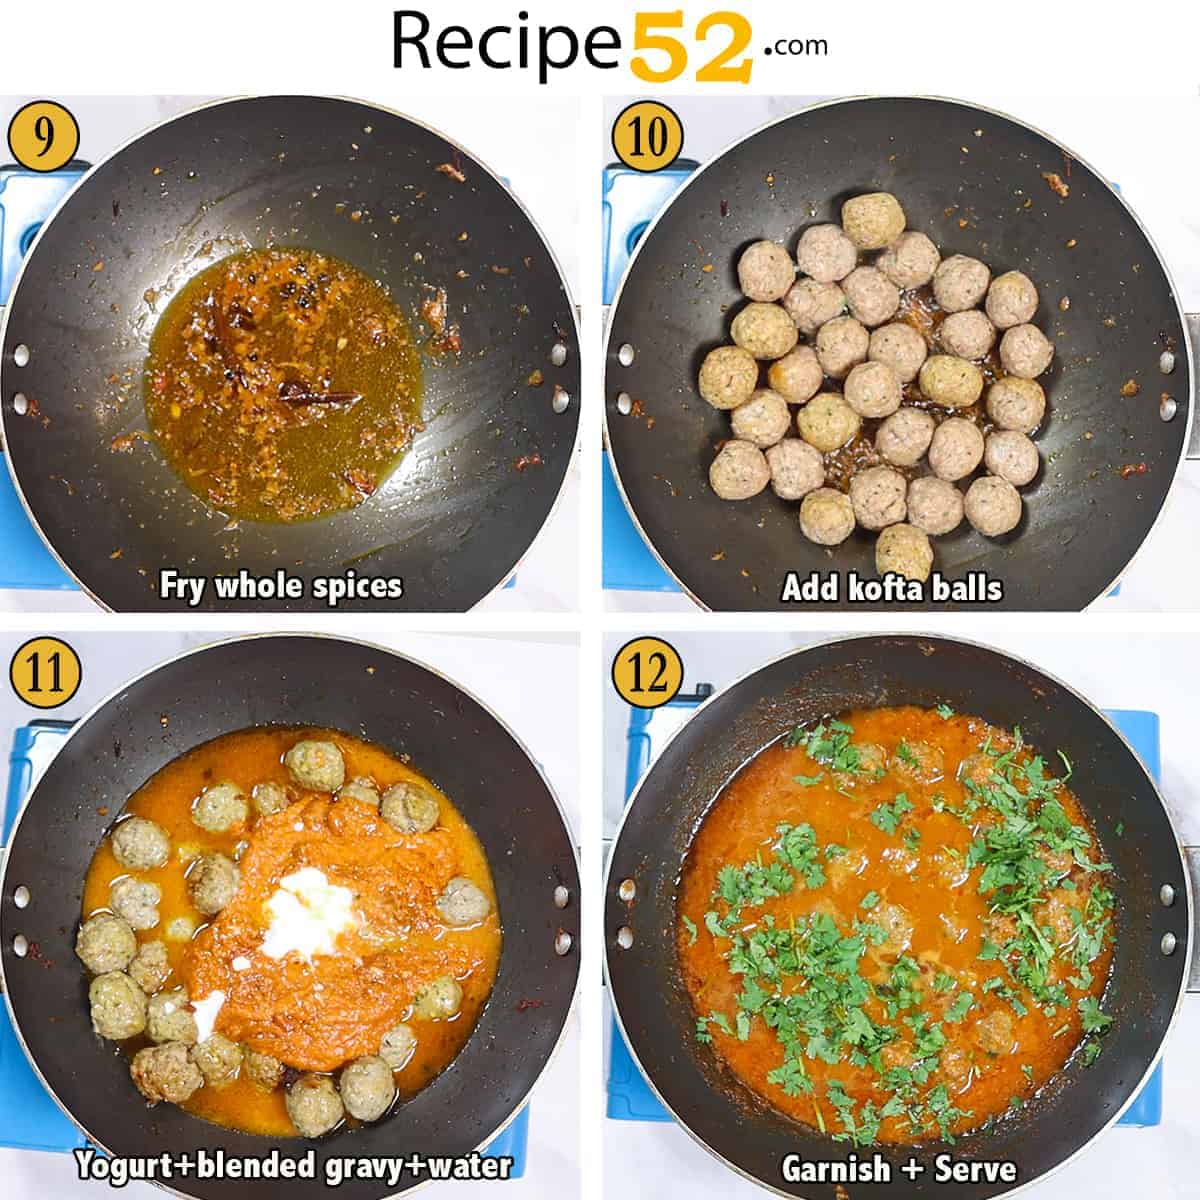 Steps to assemble kofta and gravy into a delicious curry.